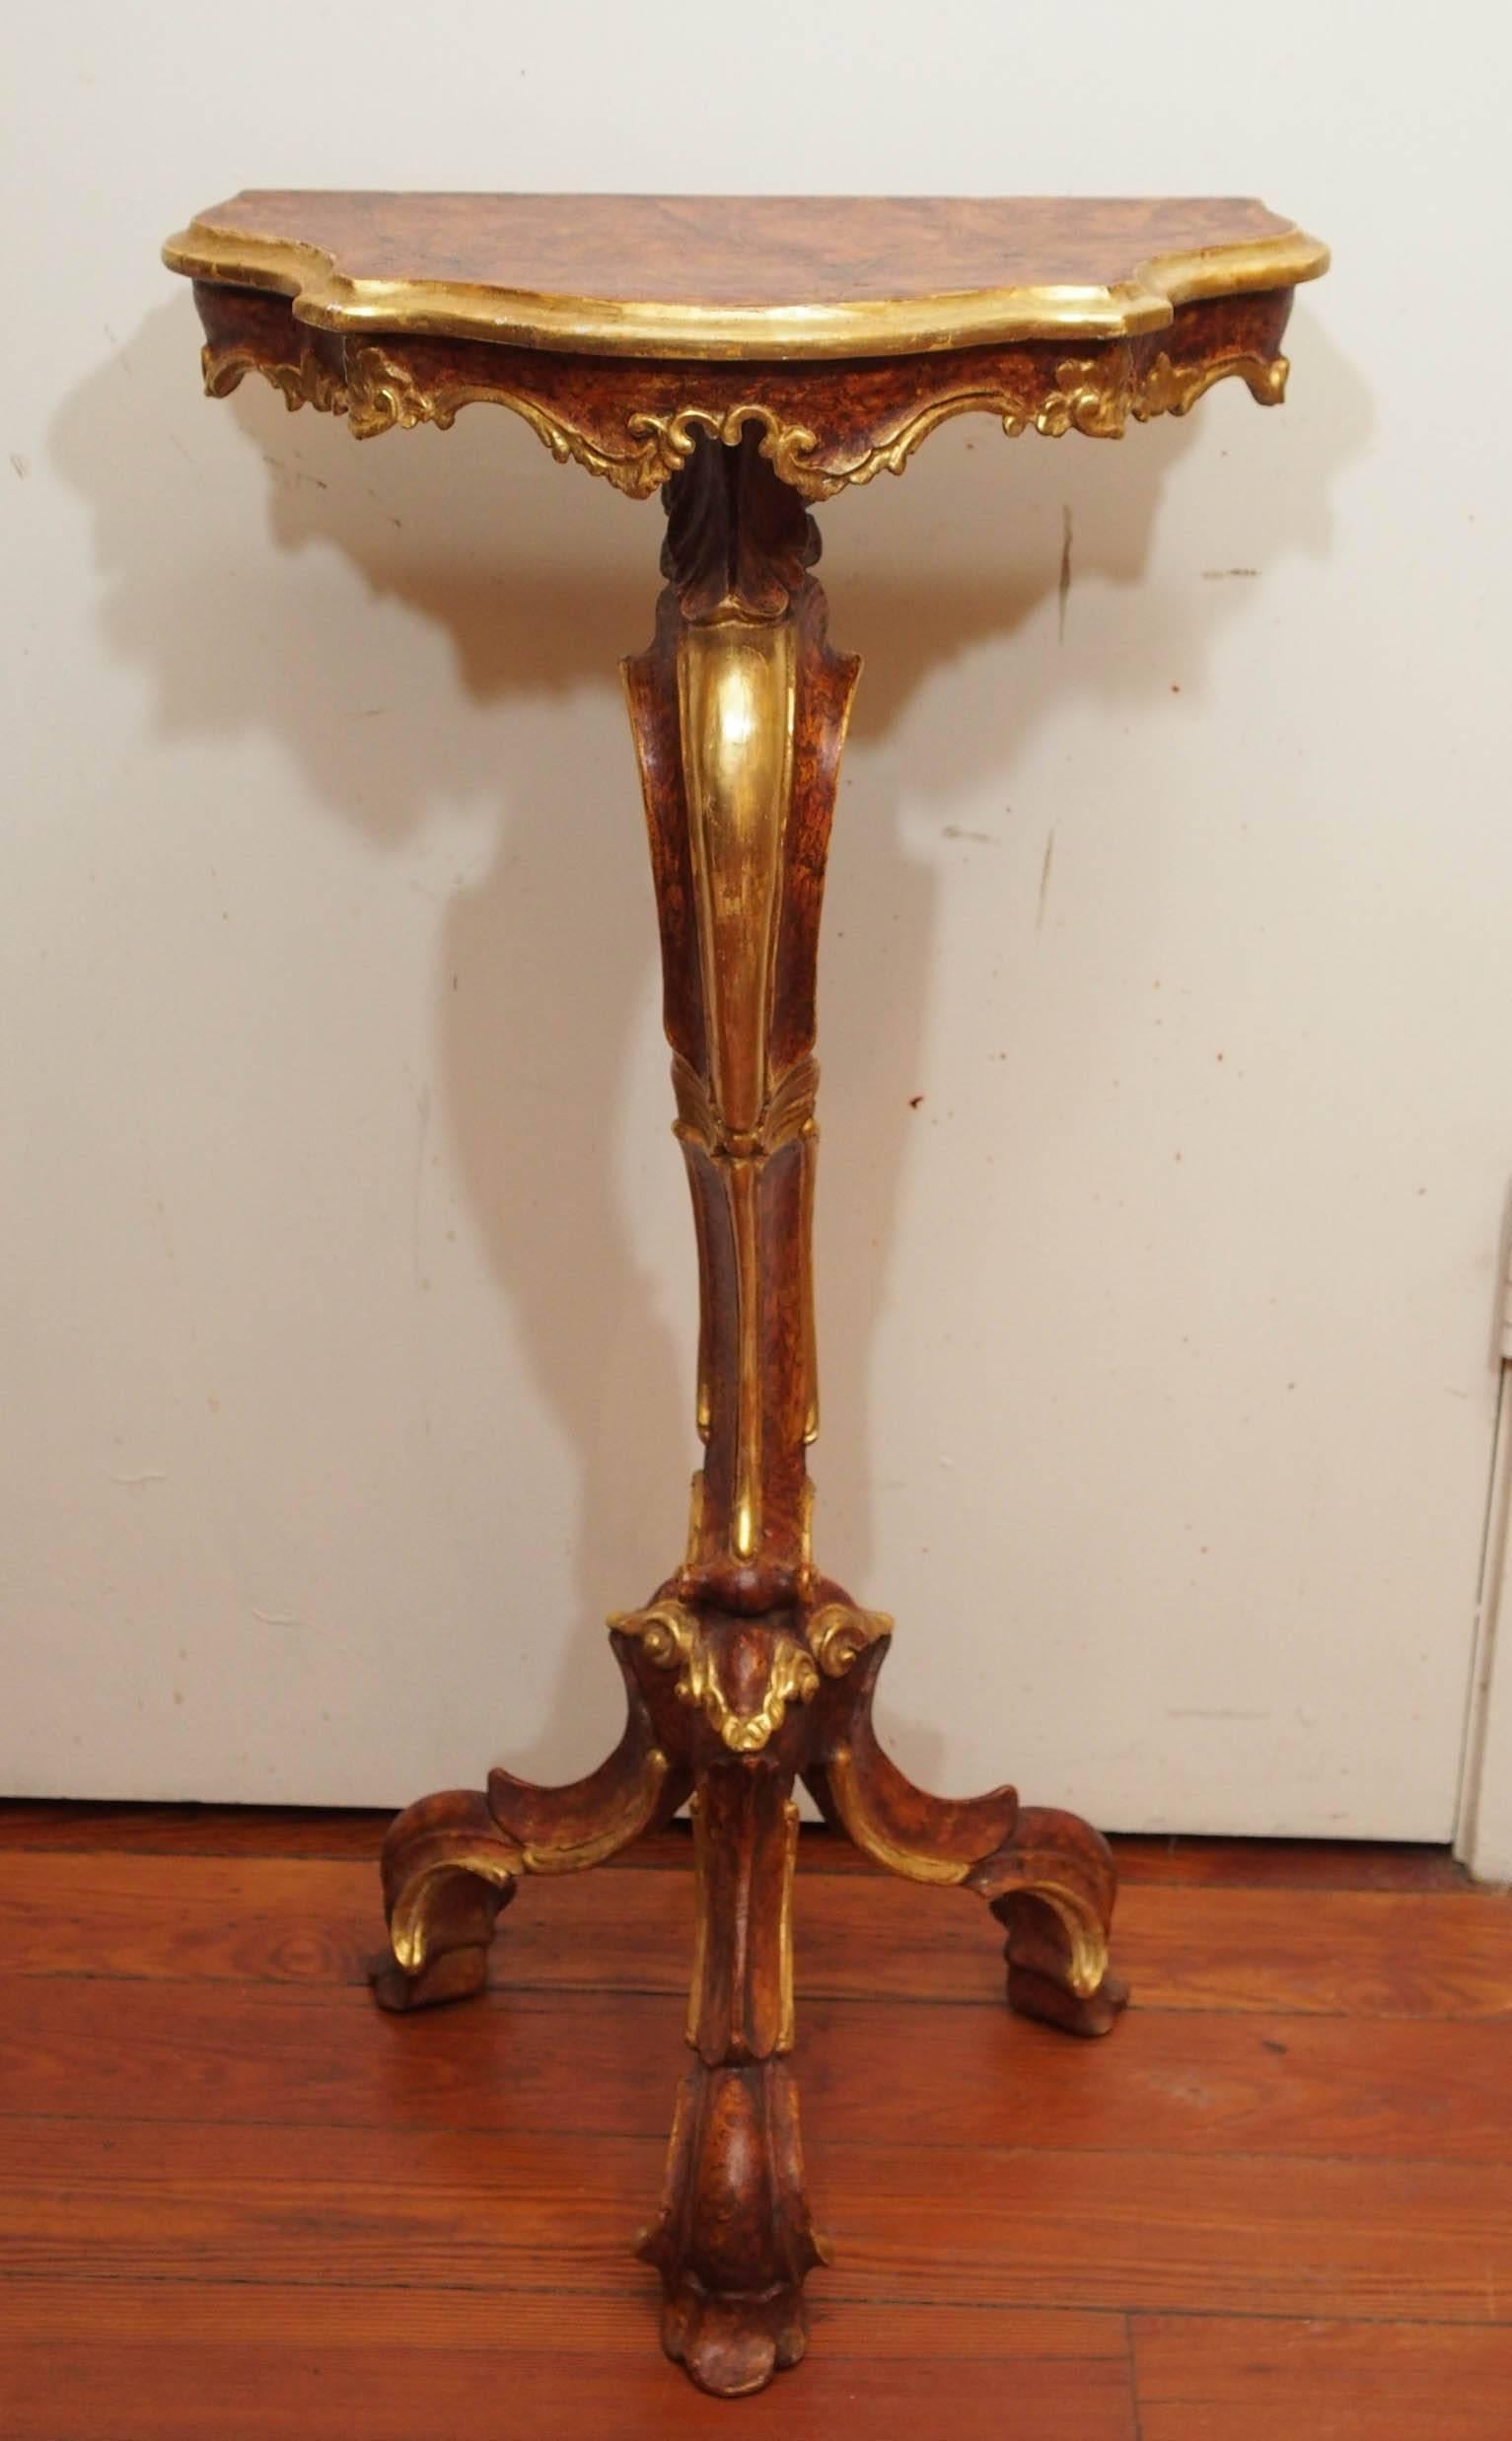 Pair of painted and parcel-gilt Italian Louis XV sellette. Single trunk on trifed base and triangle shaped top. Painted finish with gilt edges and accents.